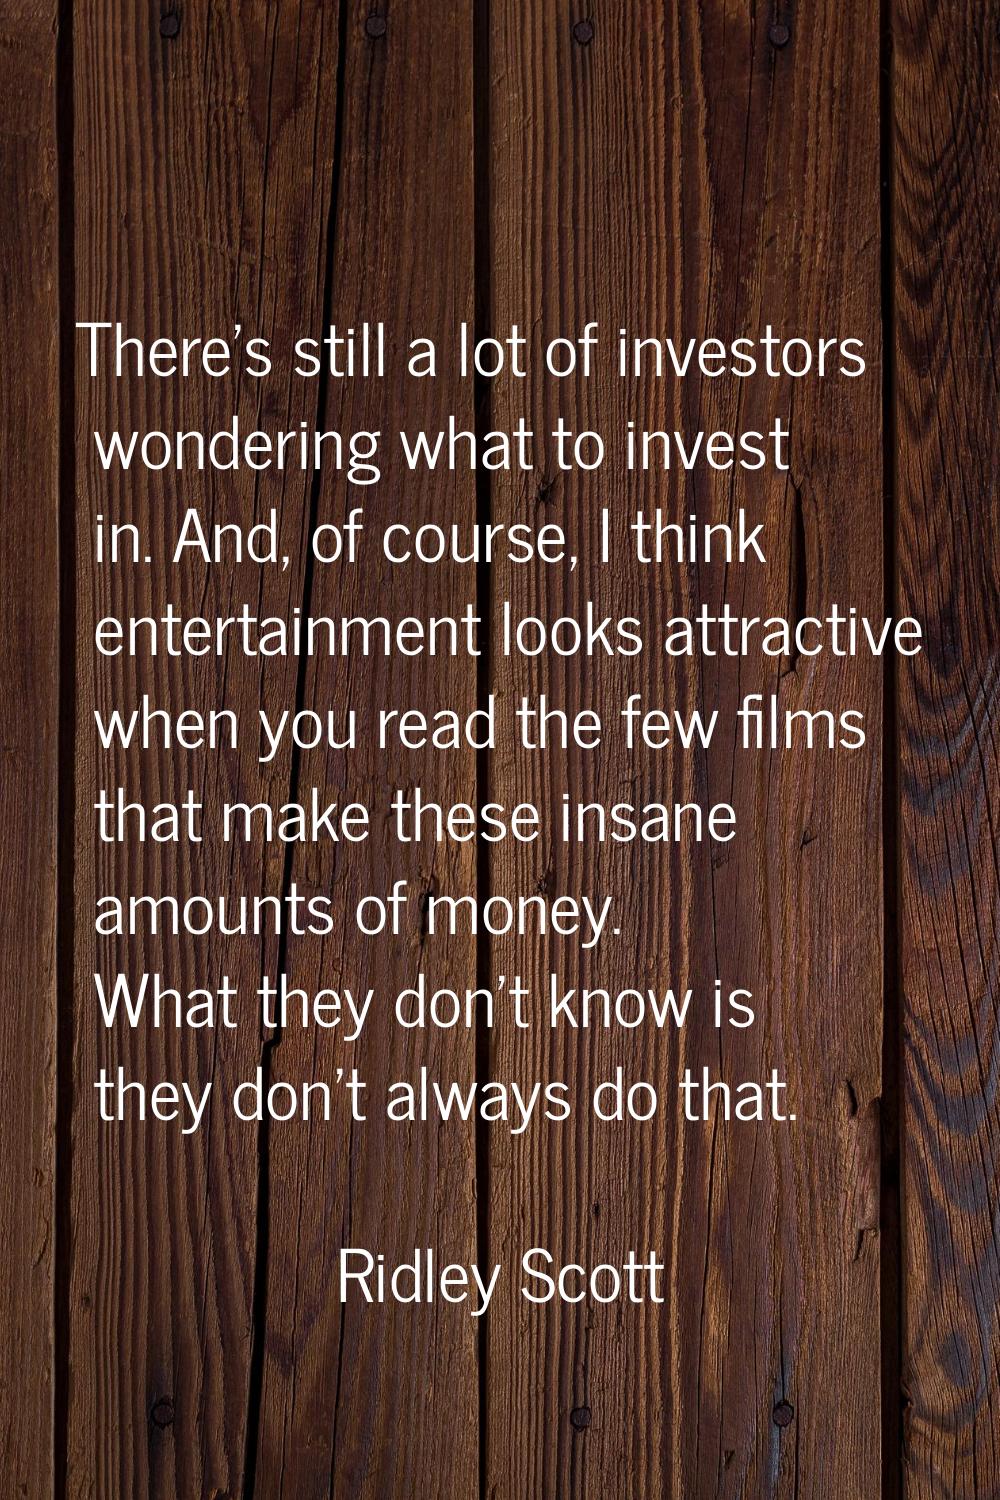 There's still a lot of investors wondering what to invest in. And, of course, I think entertainment